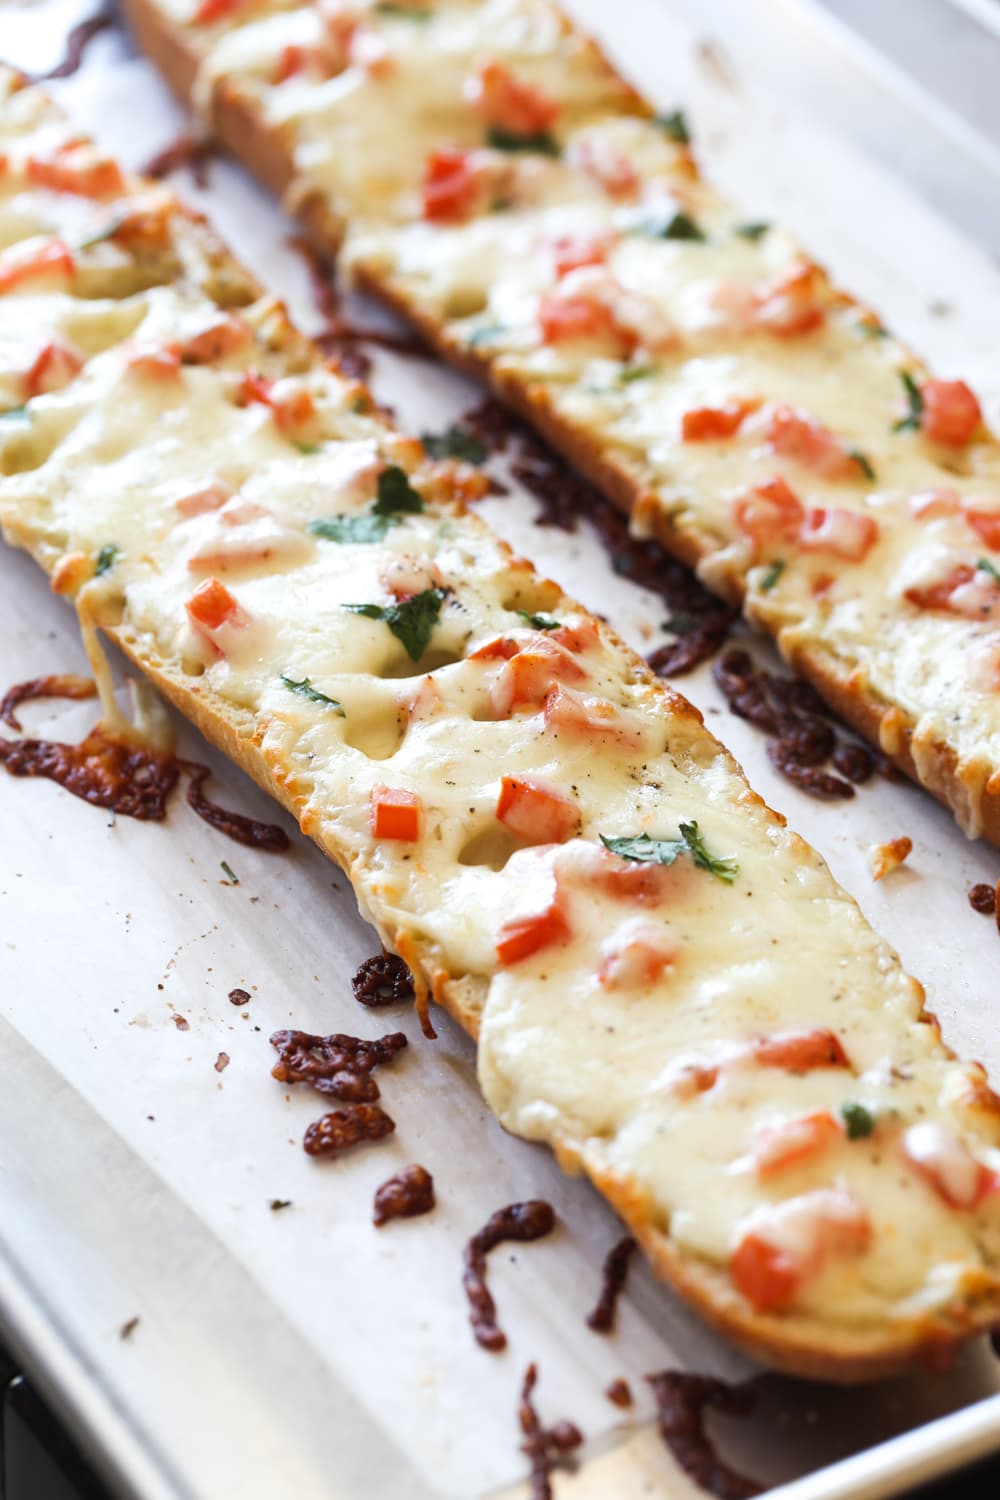 Baguette covered in cheese and topped with tomatoes